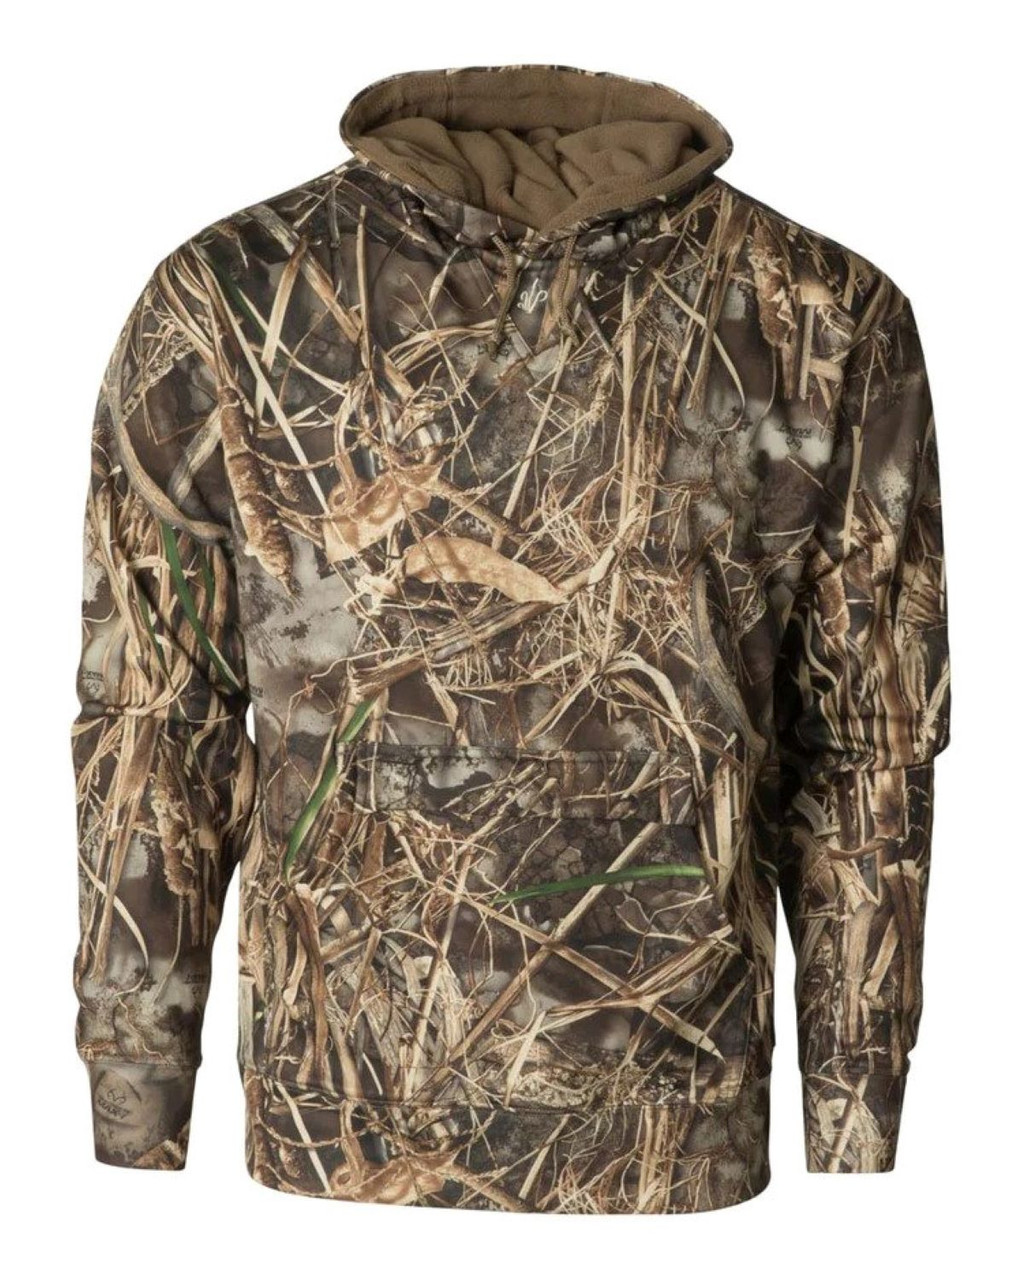 Banded Avery Embroidered Logo Hoodie Sweatshirt - Realtree Max-7 - M